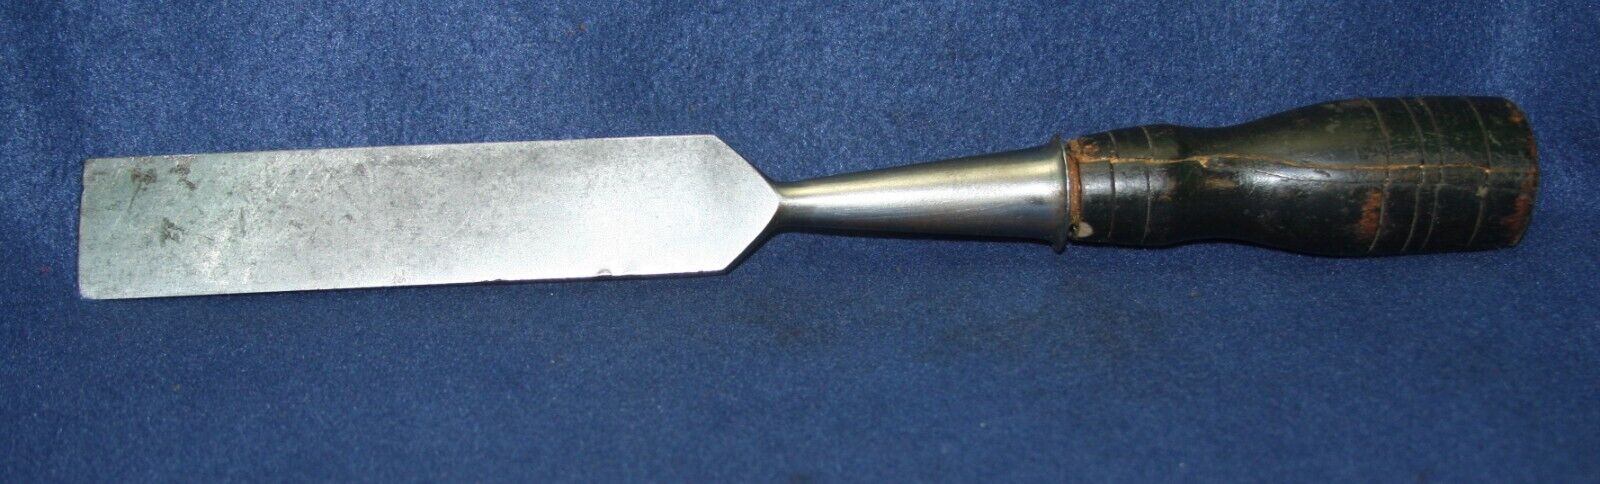 VTG T.H. WITHERBY 1 1/4” FIRMER STRAIGHT EDGE SOCKET CHISEL ^3073